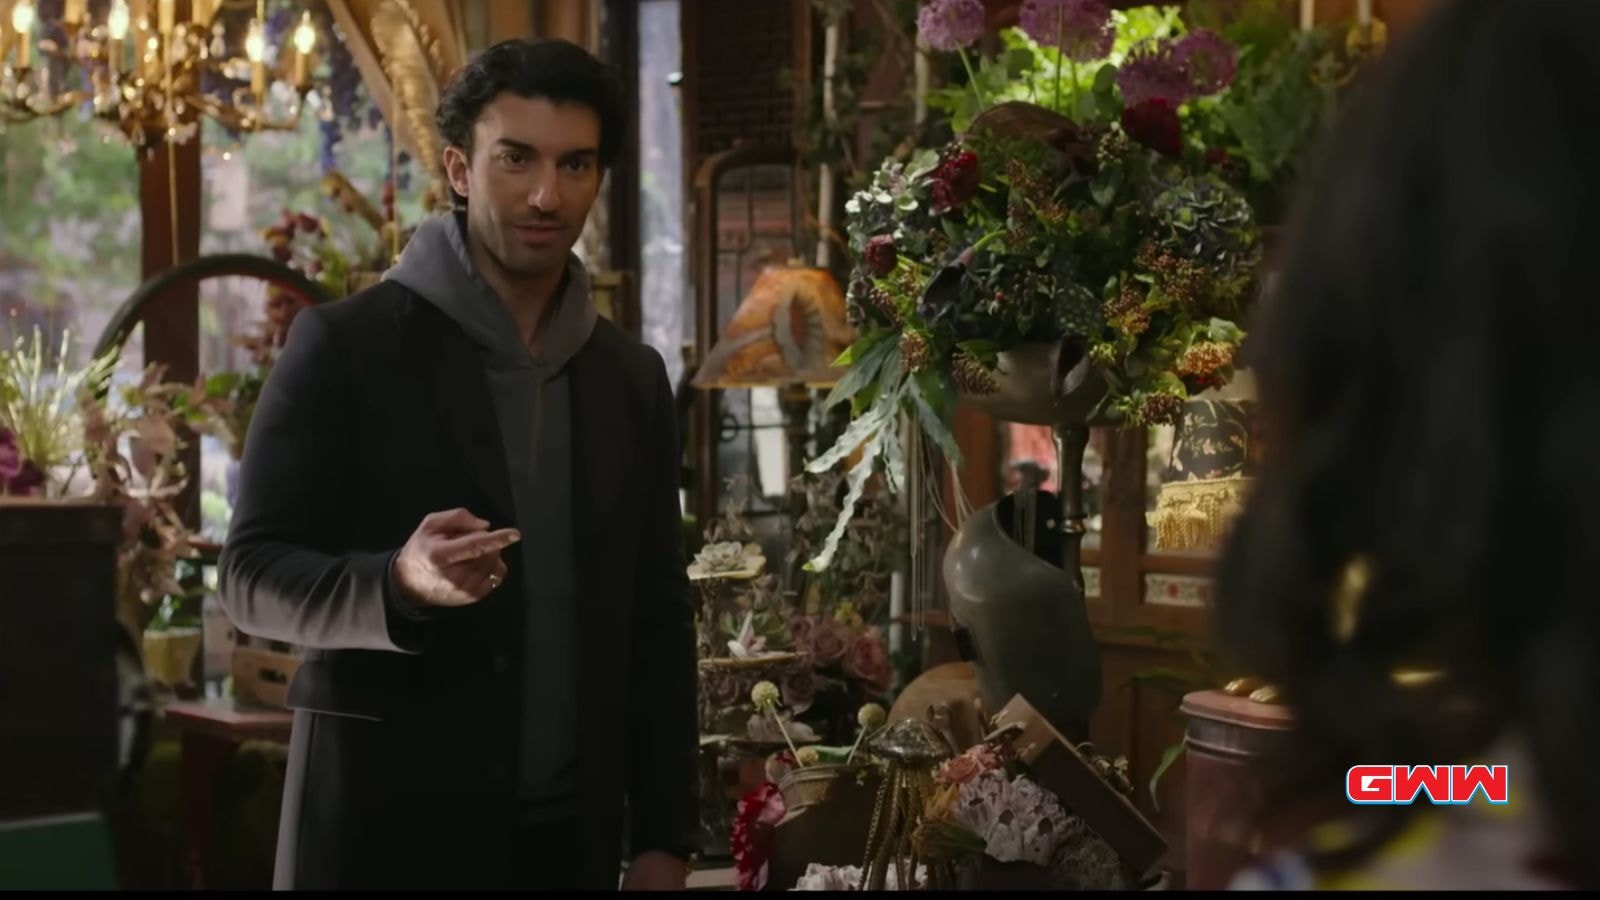 Director Justin Baldoni also playing the role of Ryle Kincaid, It Ends With Us Movie